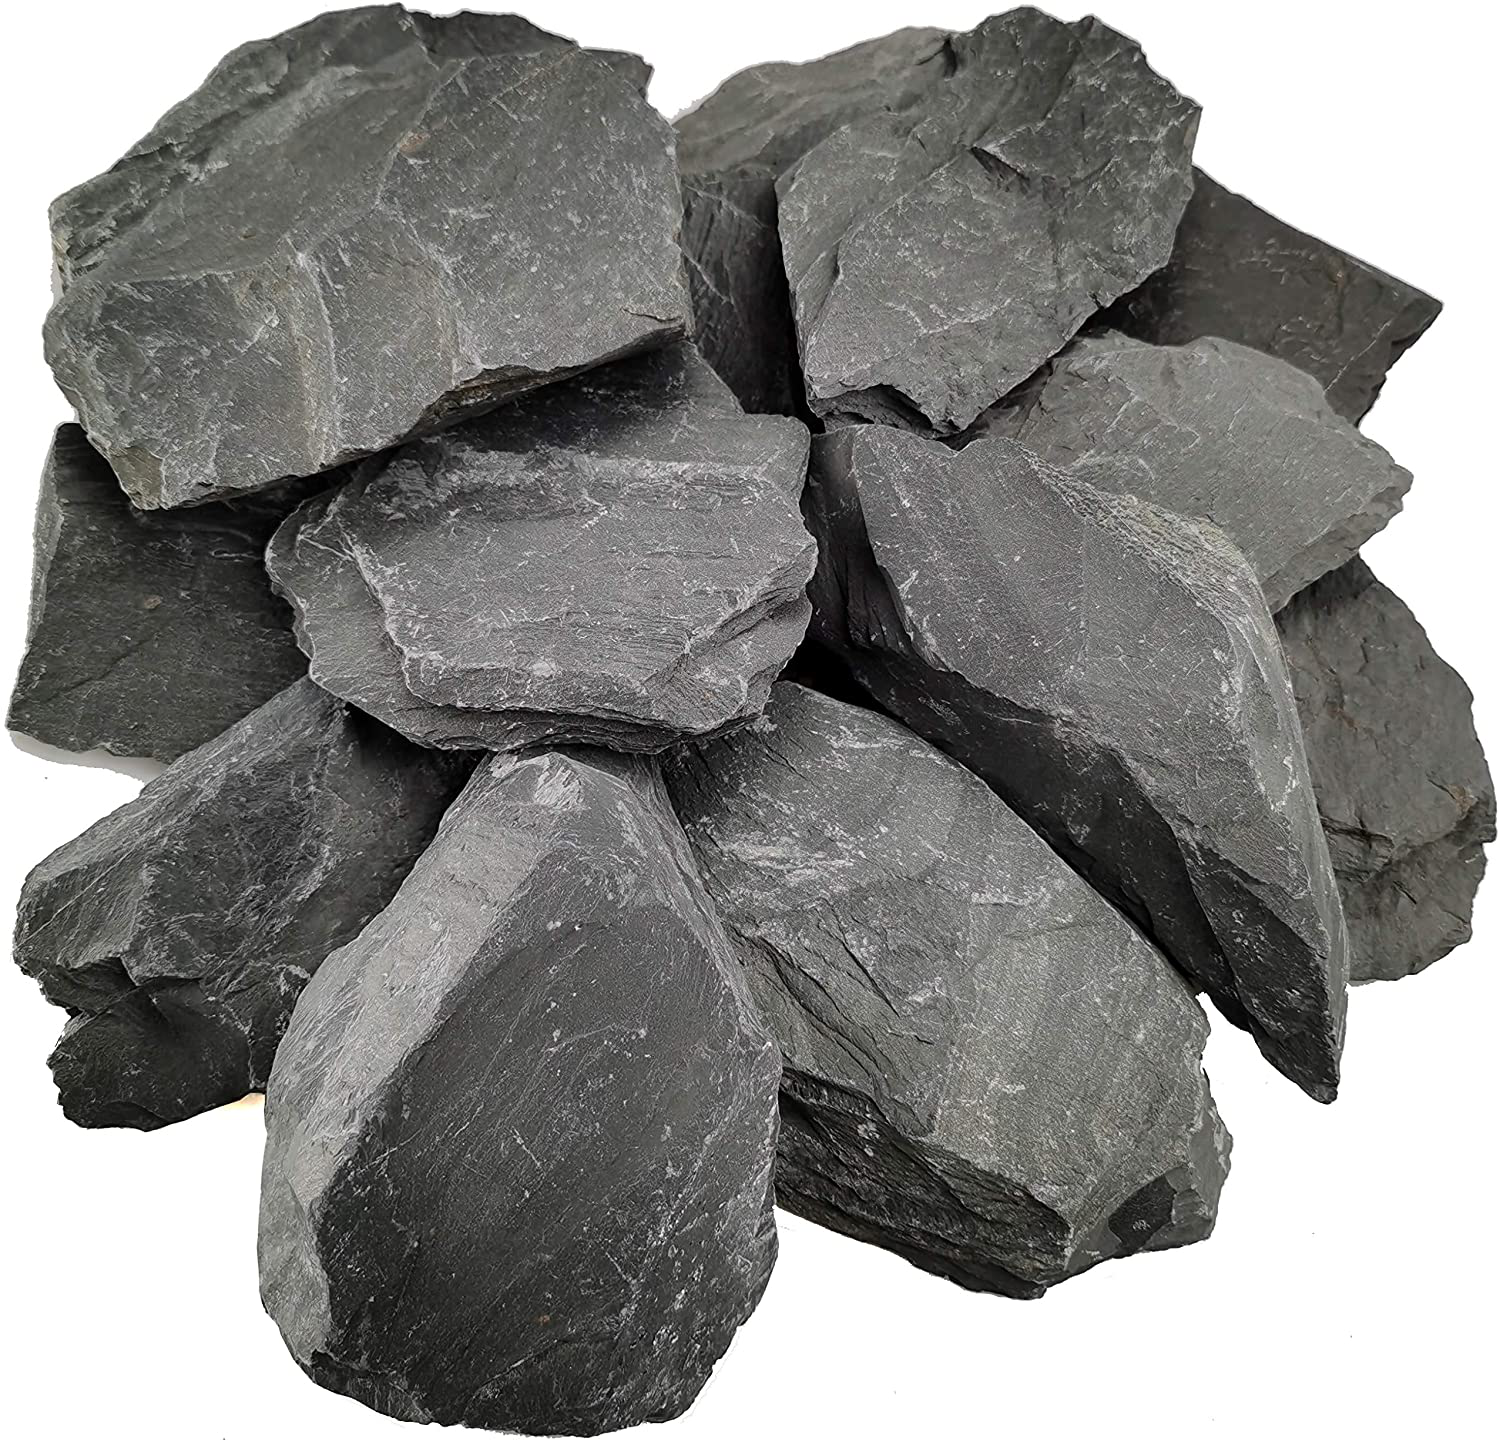 Voulosimi Natural Slate Rocks Stone Perfect Rocks Seiryu Rock for Aquariums, Landscaping Model,Amphibian Enclosures Animals & Pet Supplies > Pet Supplies > Fish Supplies > Aquarium Decor Voulosimi 12 Pound Slate 5-7in  